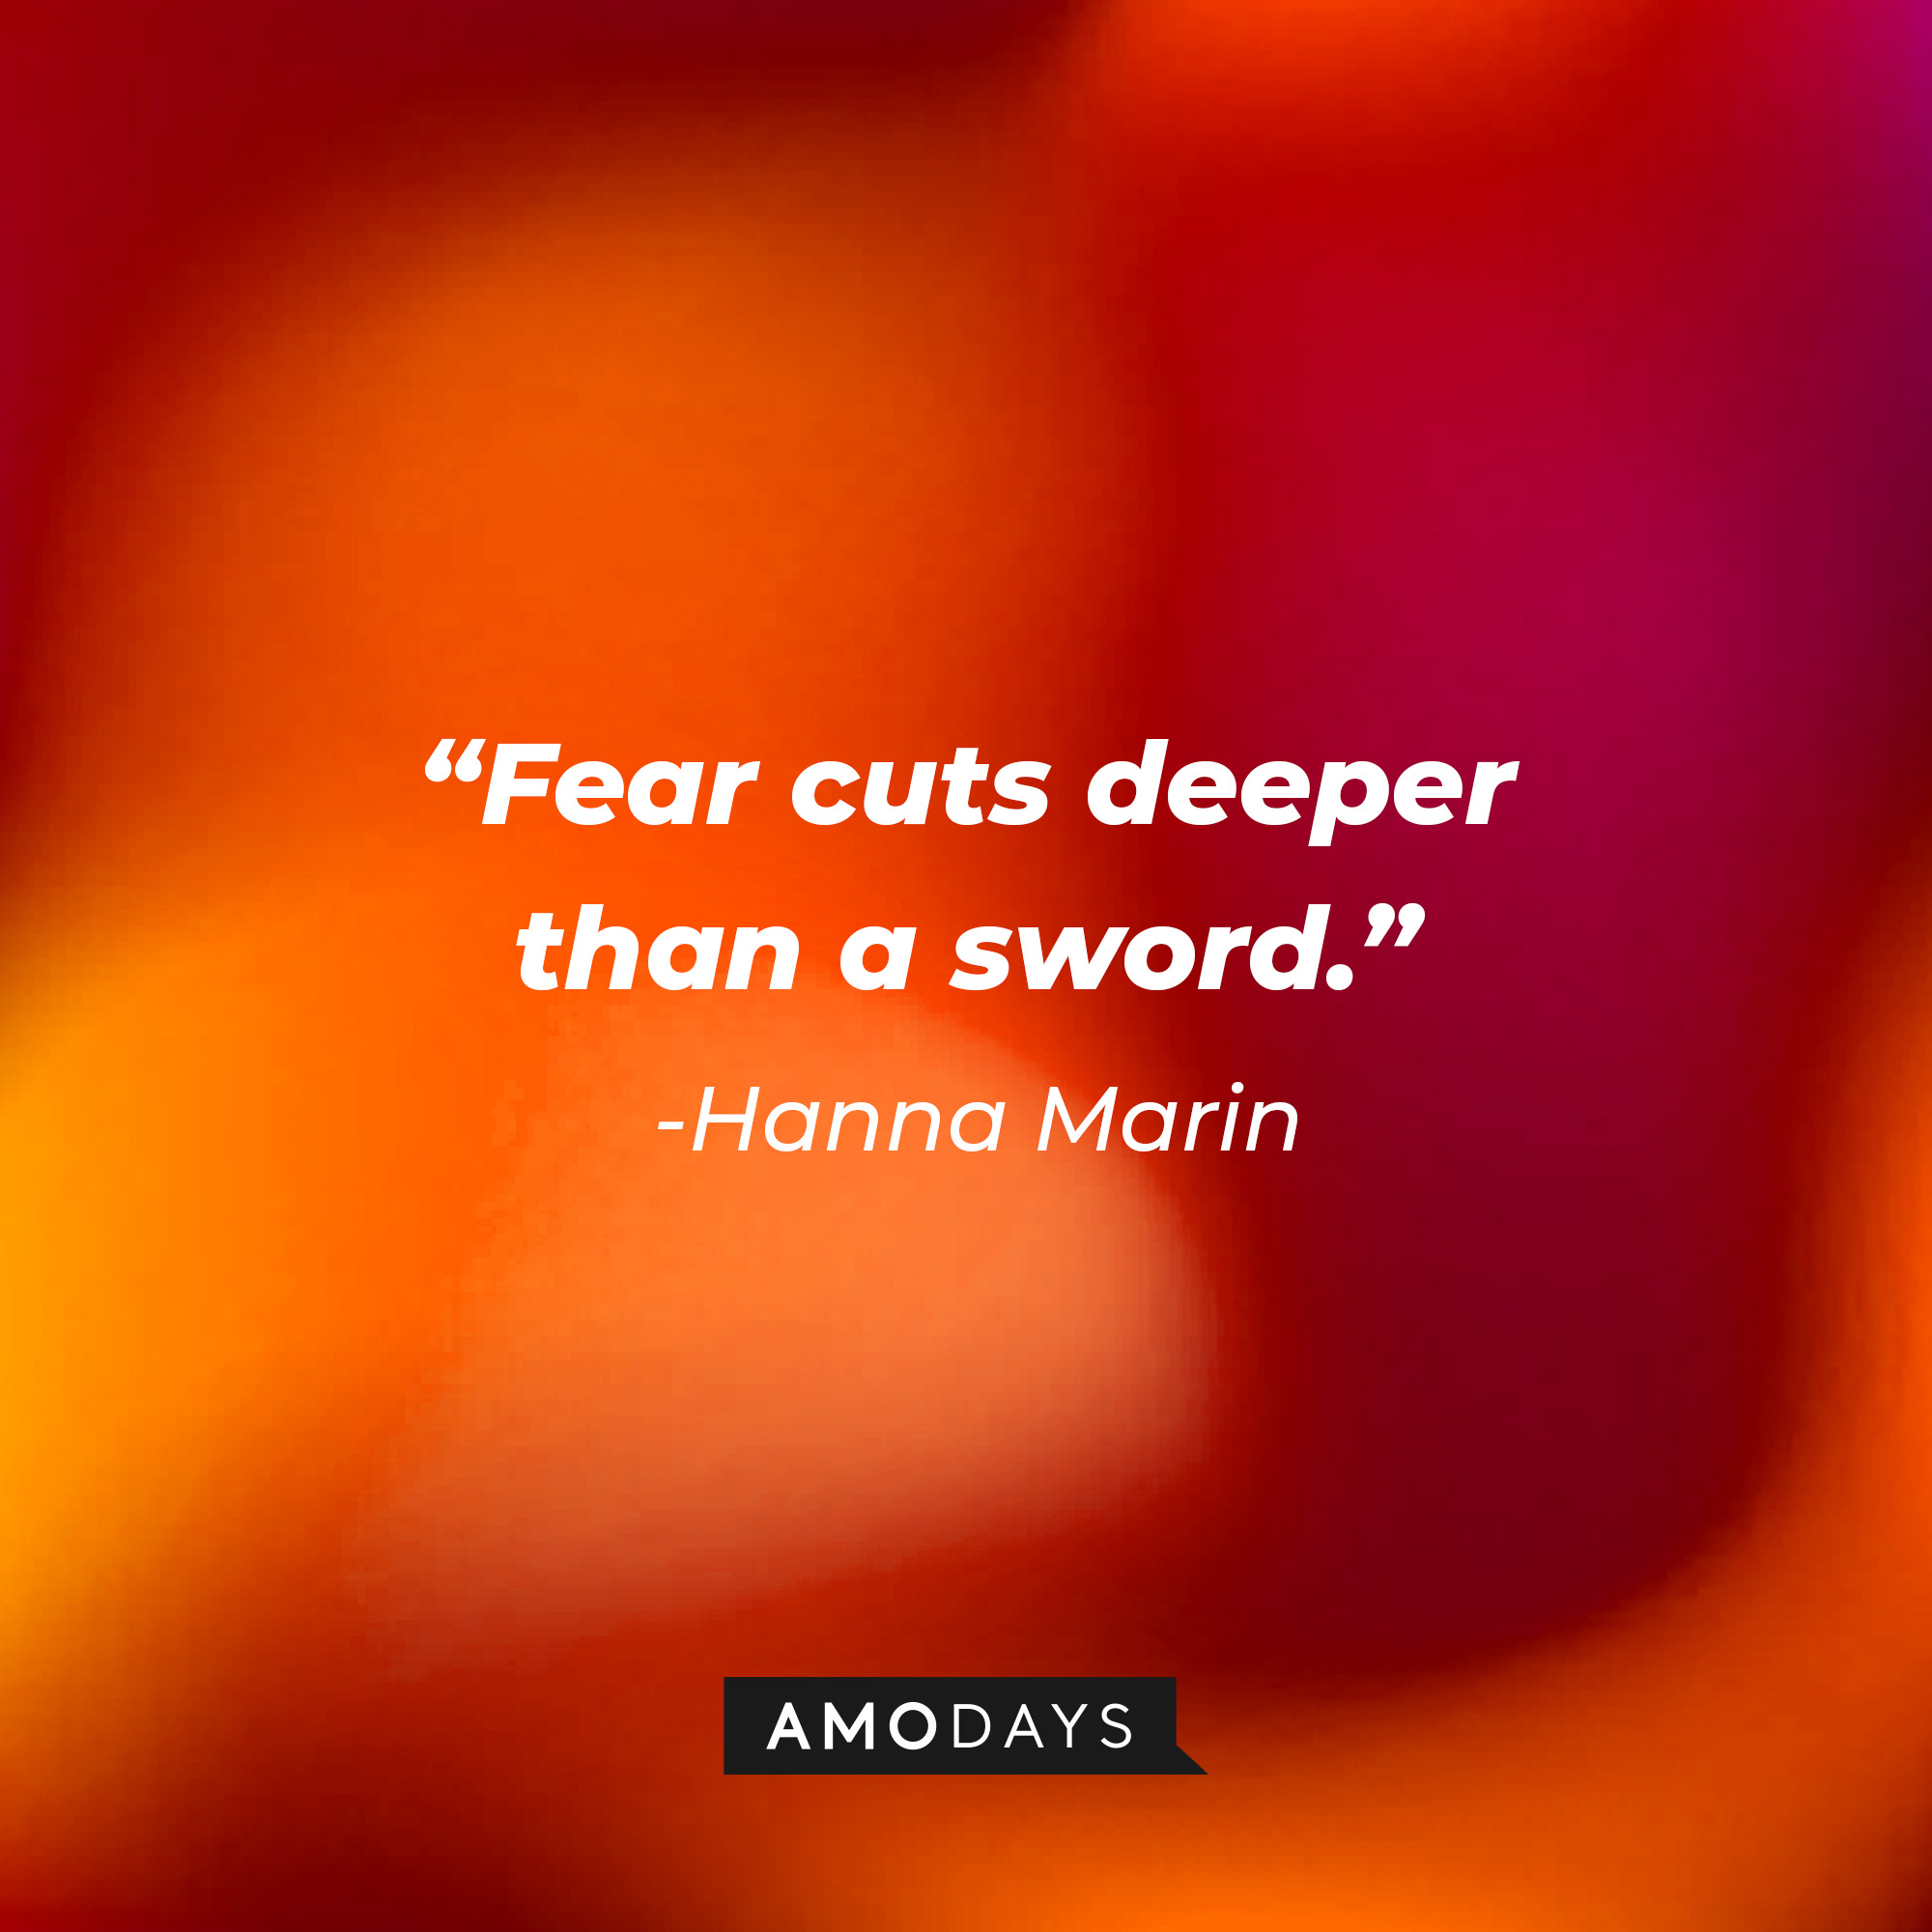 Hanna Marin's quotes: "Fear cuts deeper than a sword." | Source: Amodays